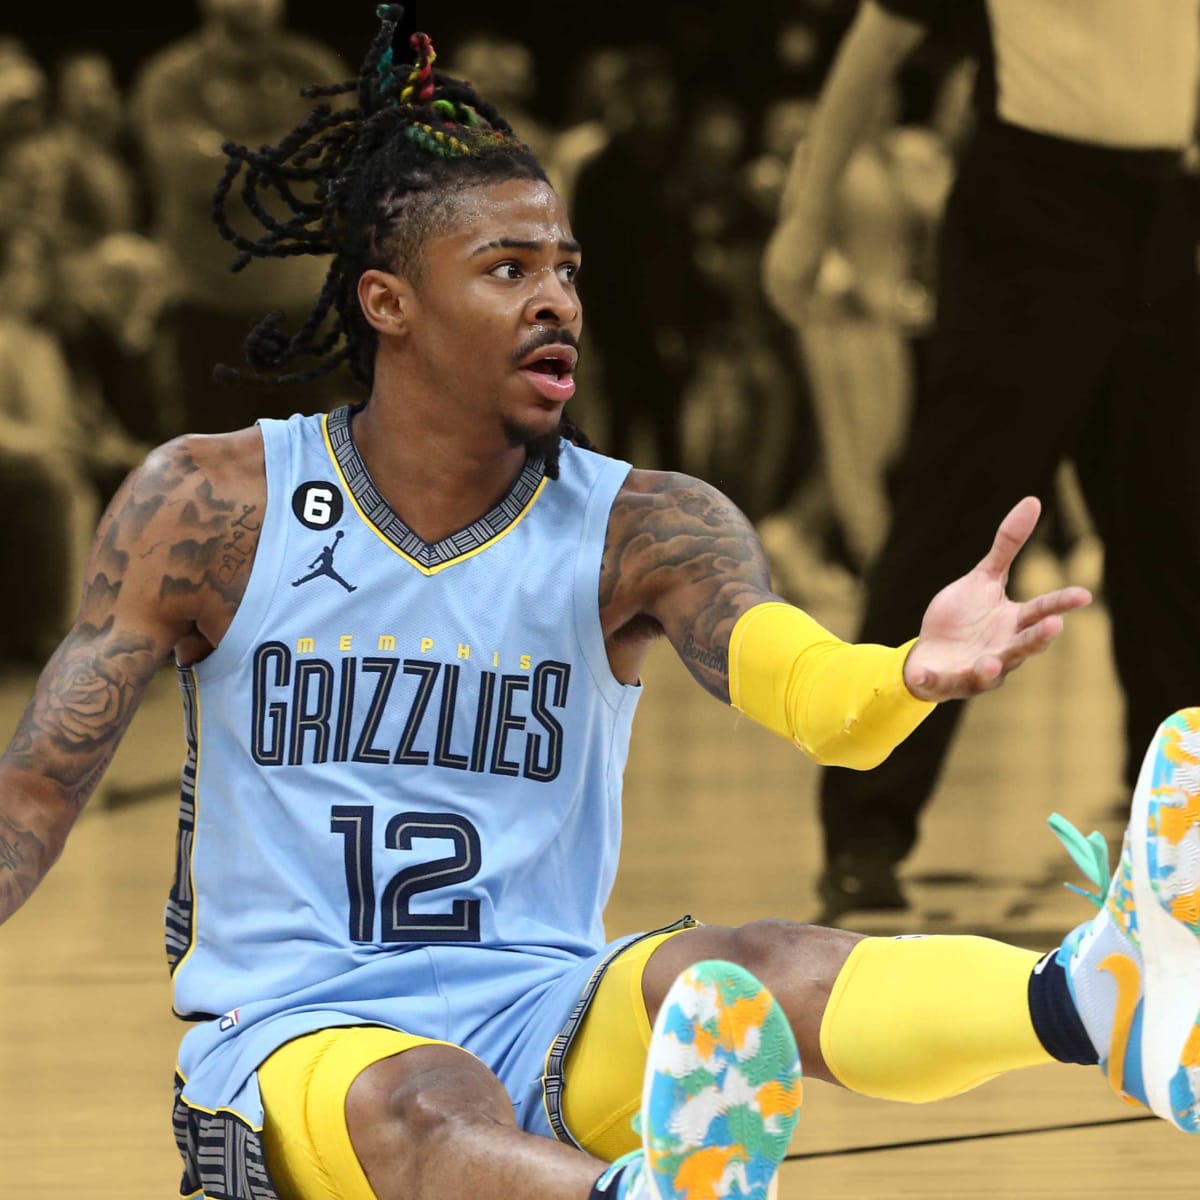 Nike postpones release of Ja Morant's signature shoe - Basketball Network -  Your daily dose of basketball